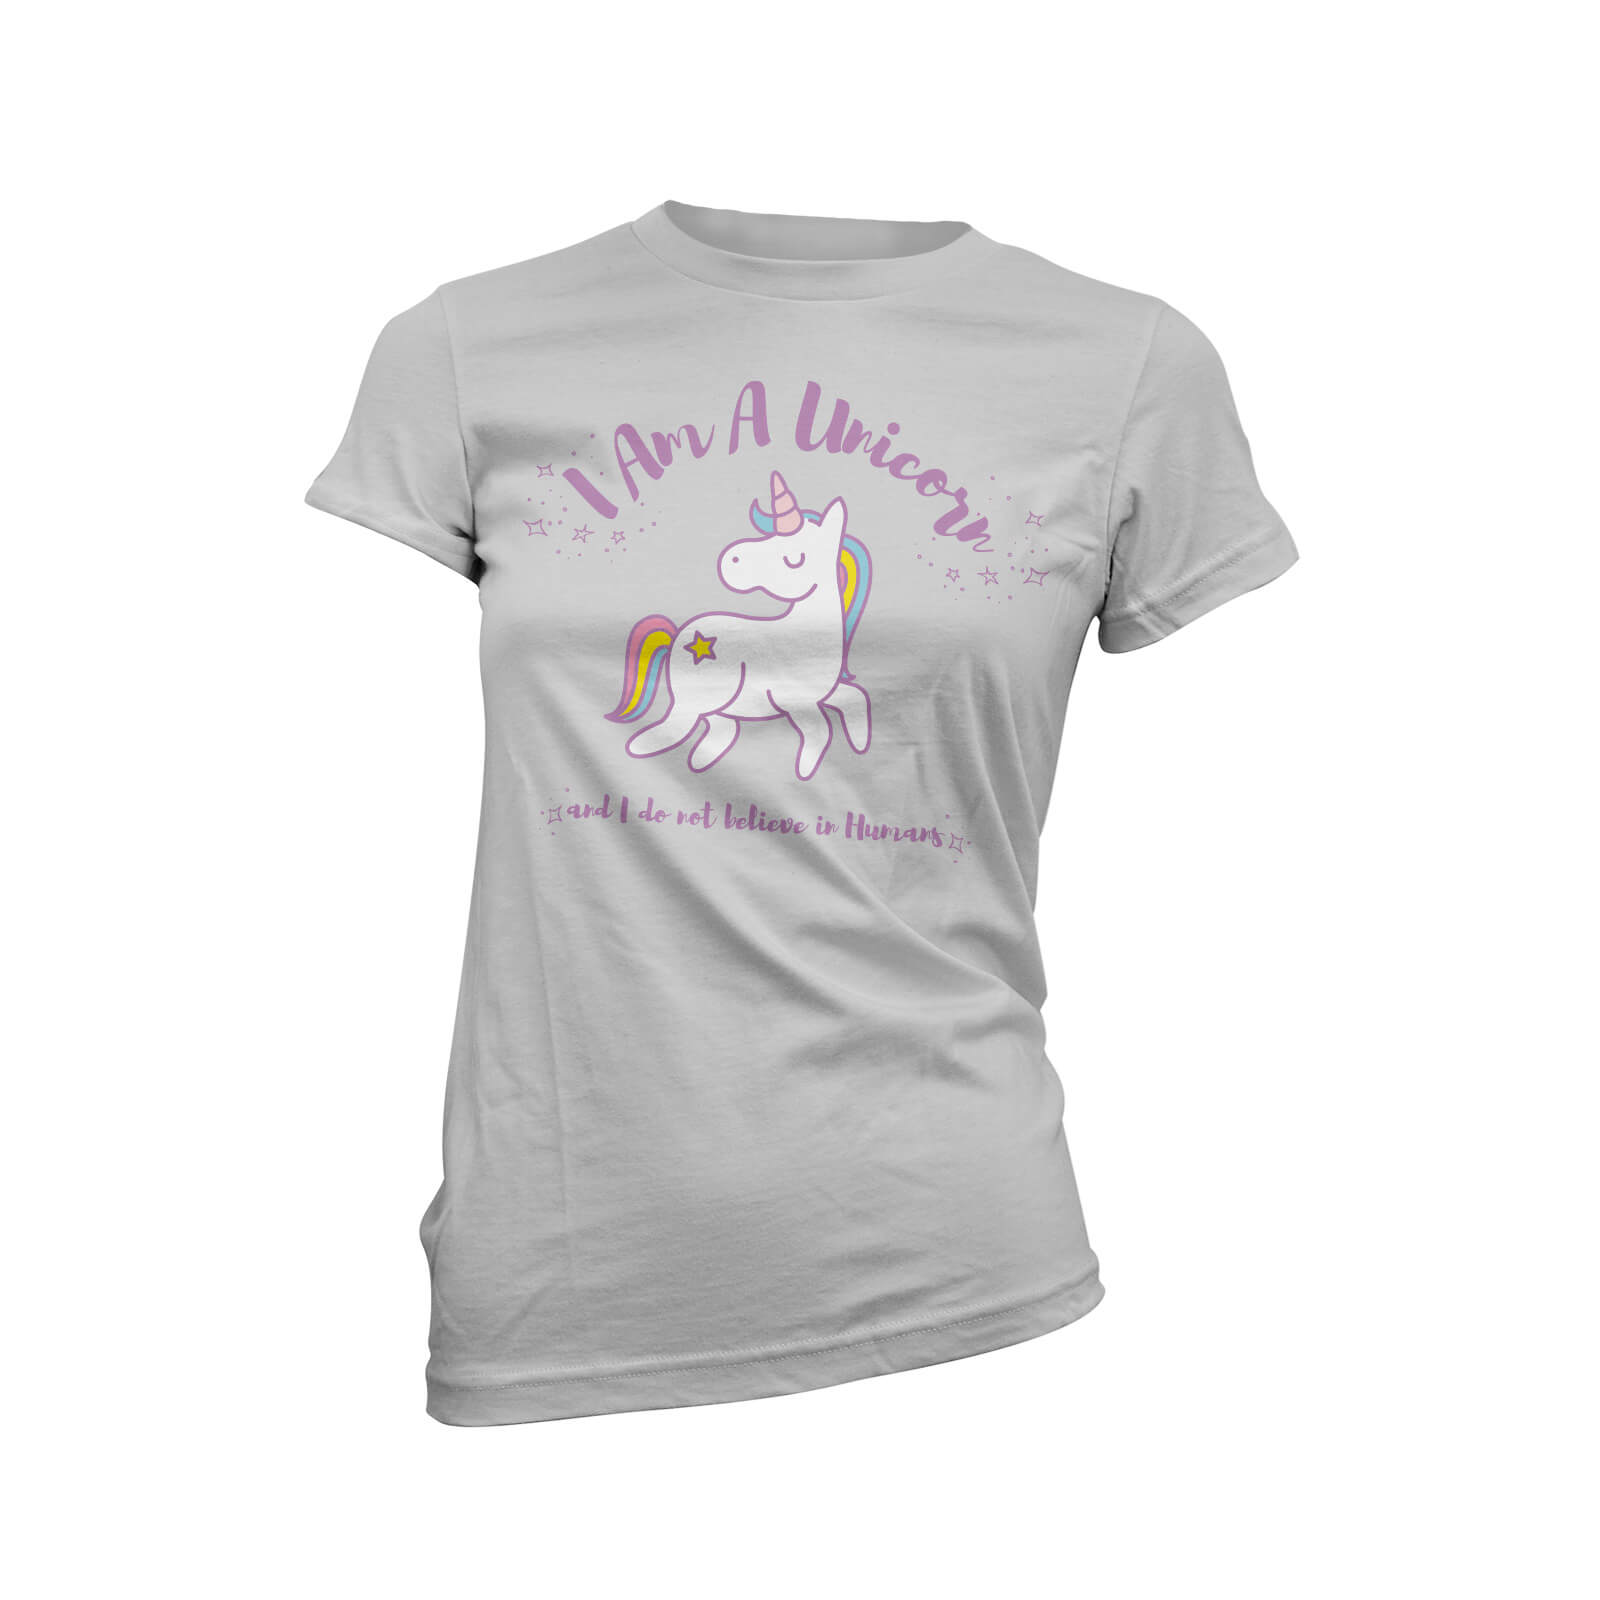 I Am A Unicorn And I Don't Believe In Humans Women's Grey T-Shirt - S - Grey